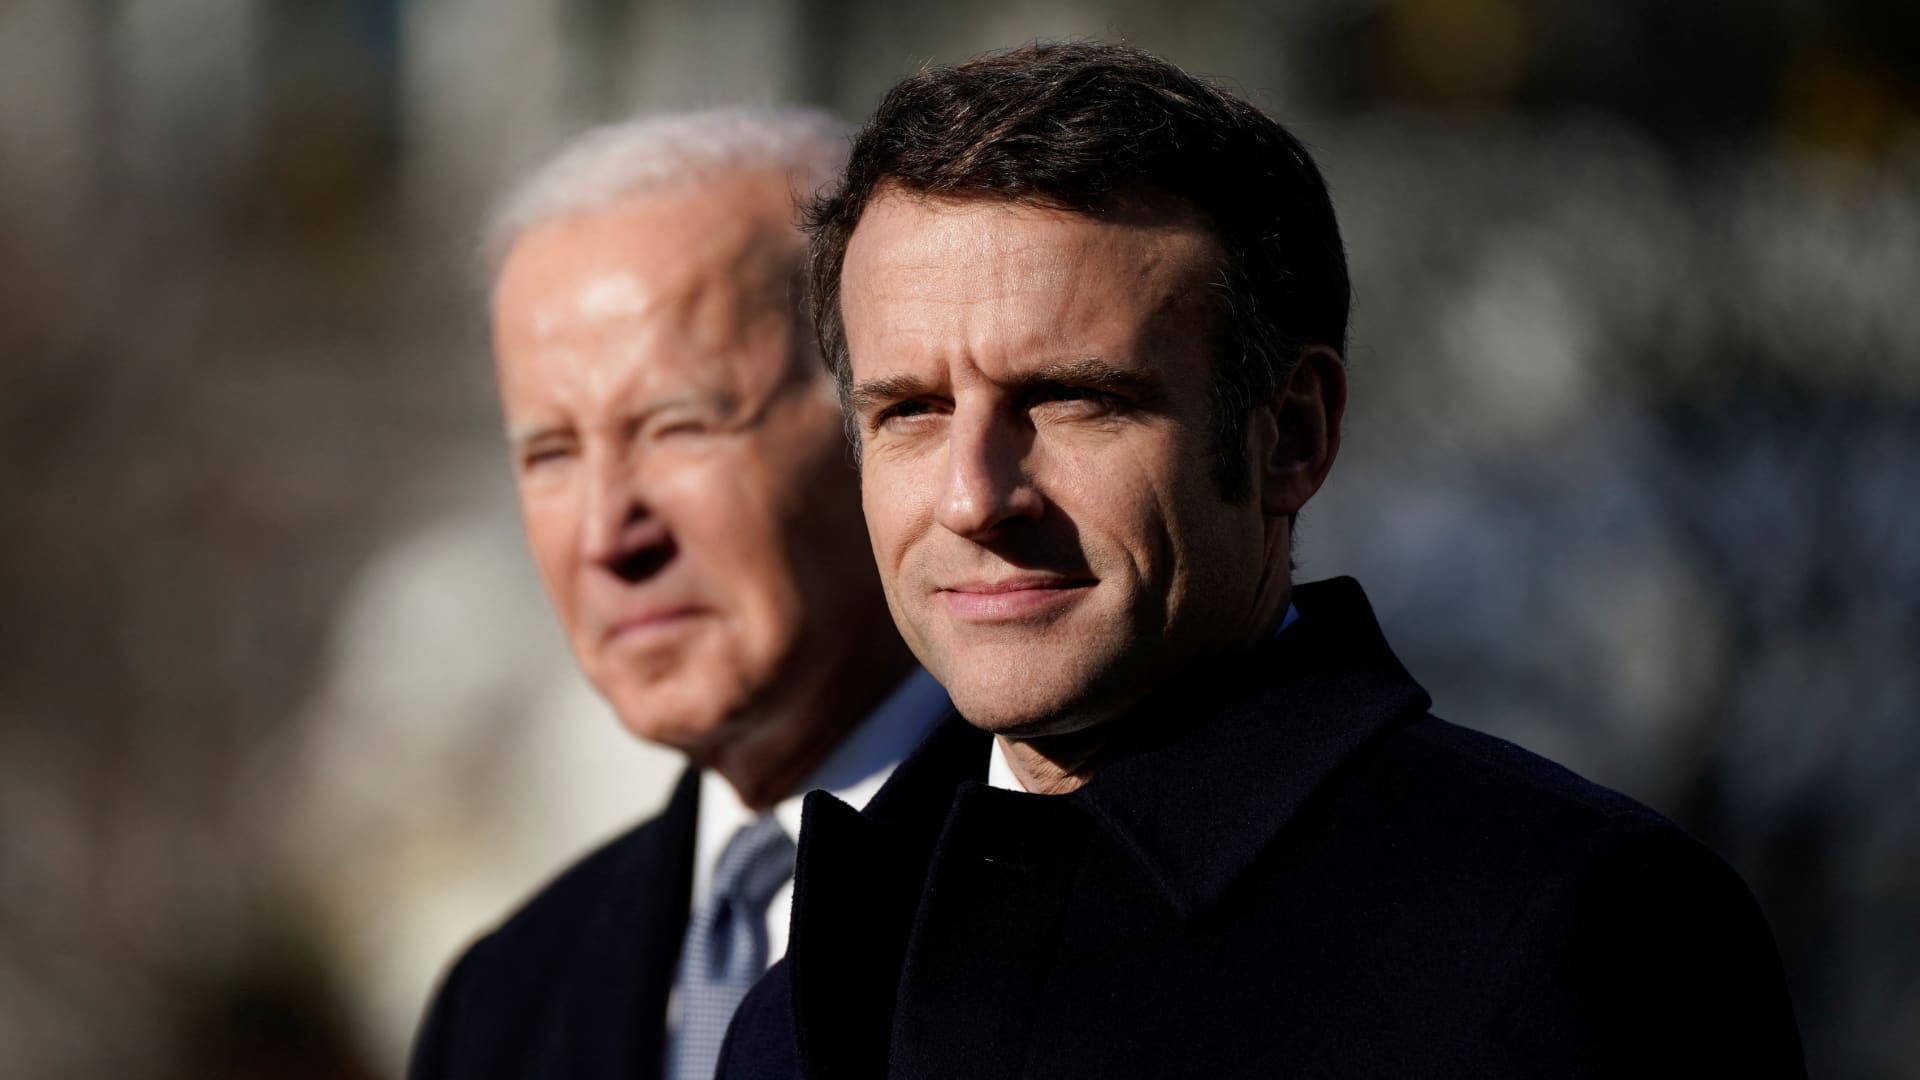 In Biden’s first state visit, French President Macron says U.S. must stand with ..